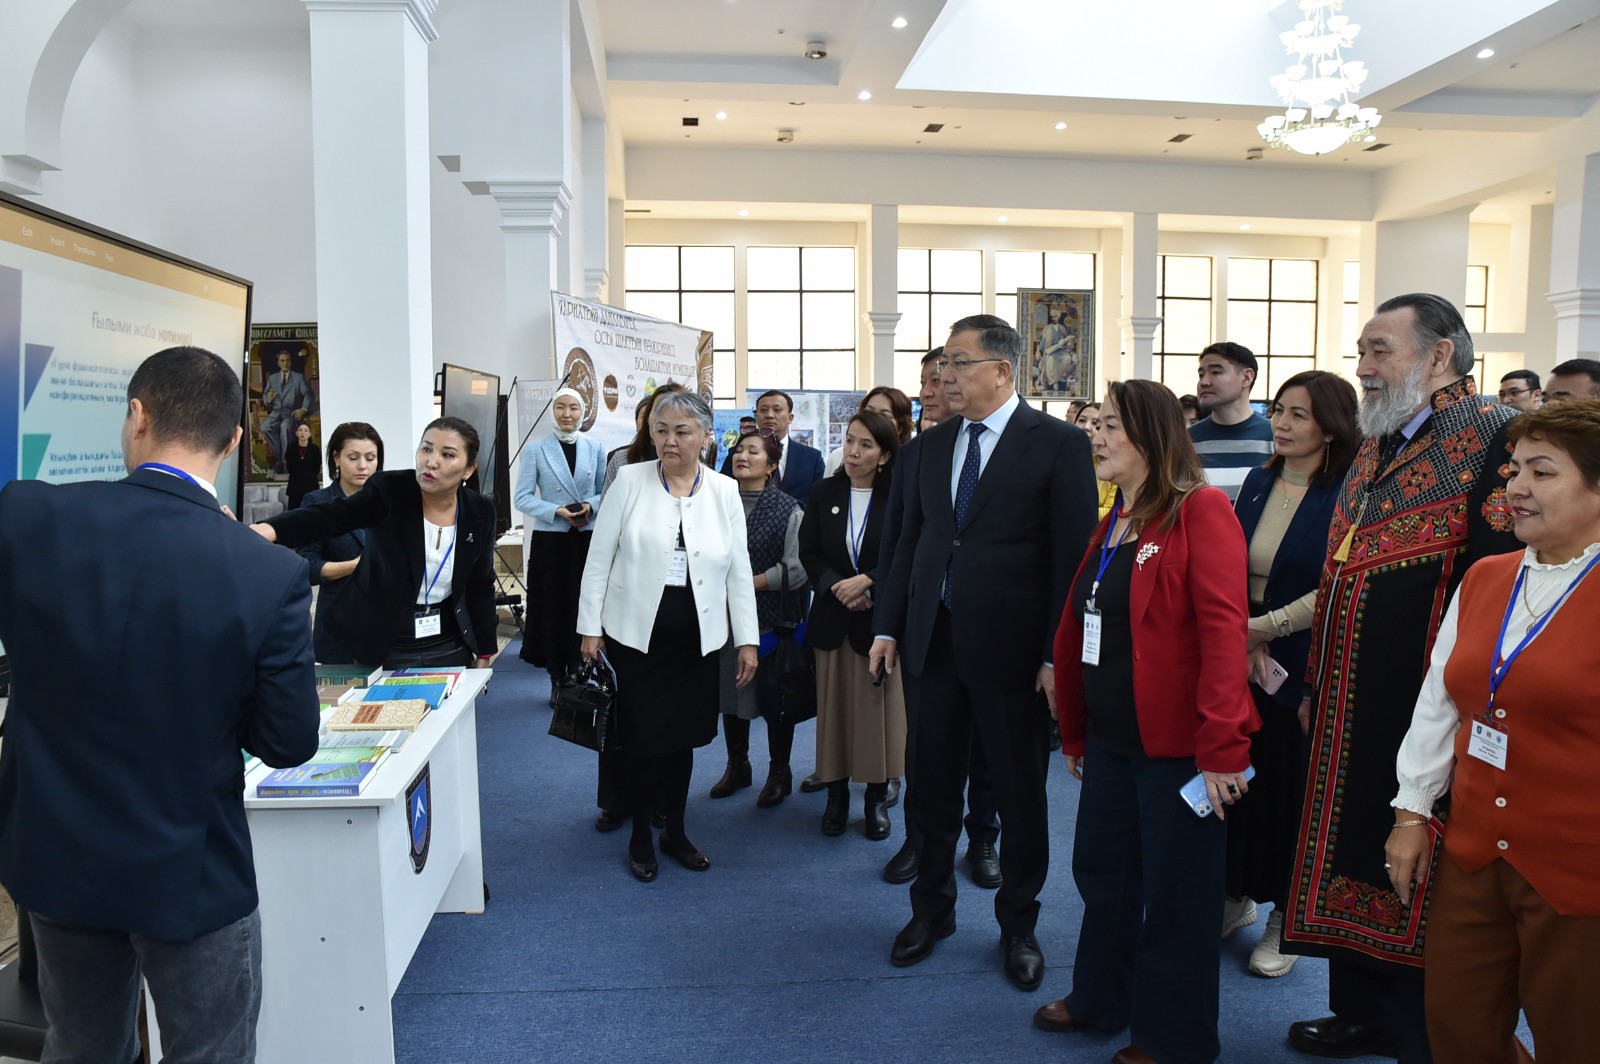 Presentation of the project "Lexicographic system of common Turkic phraseological units in Turkic languages" to the rector of KazNU Zh.K.Tuimebayev.